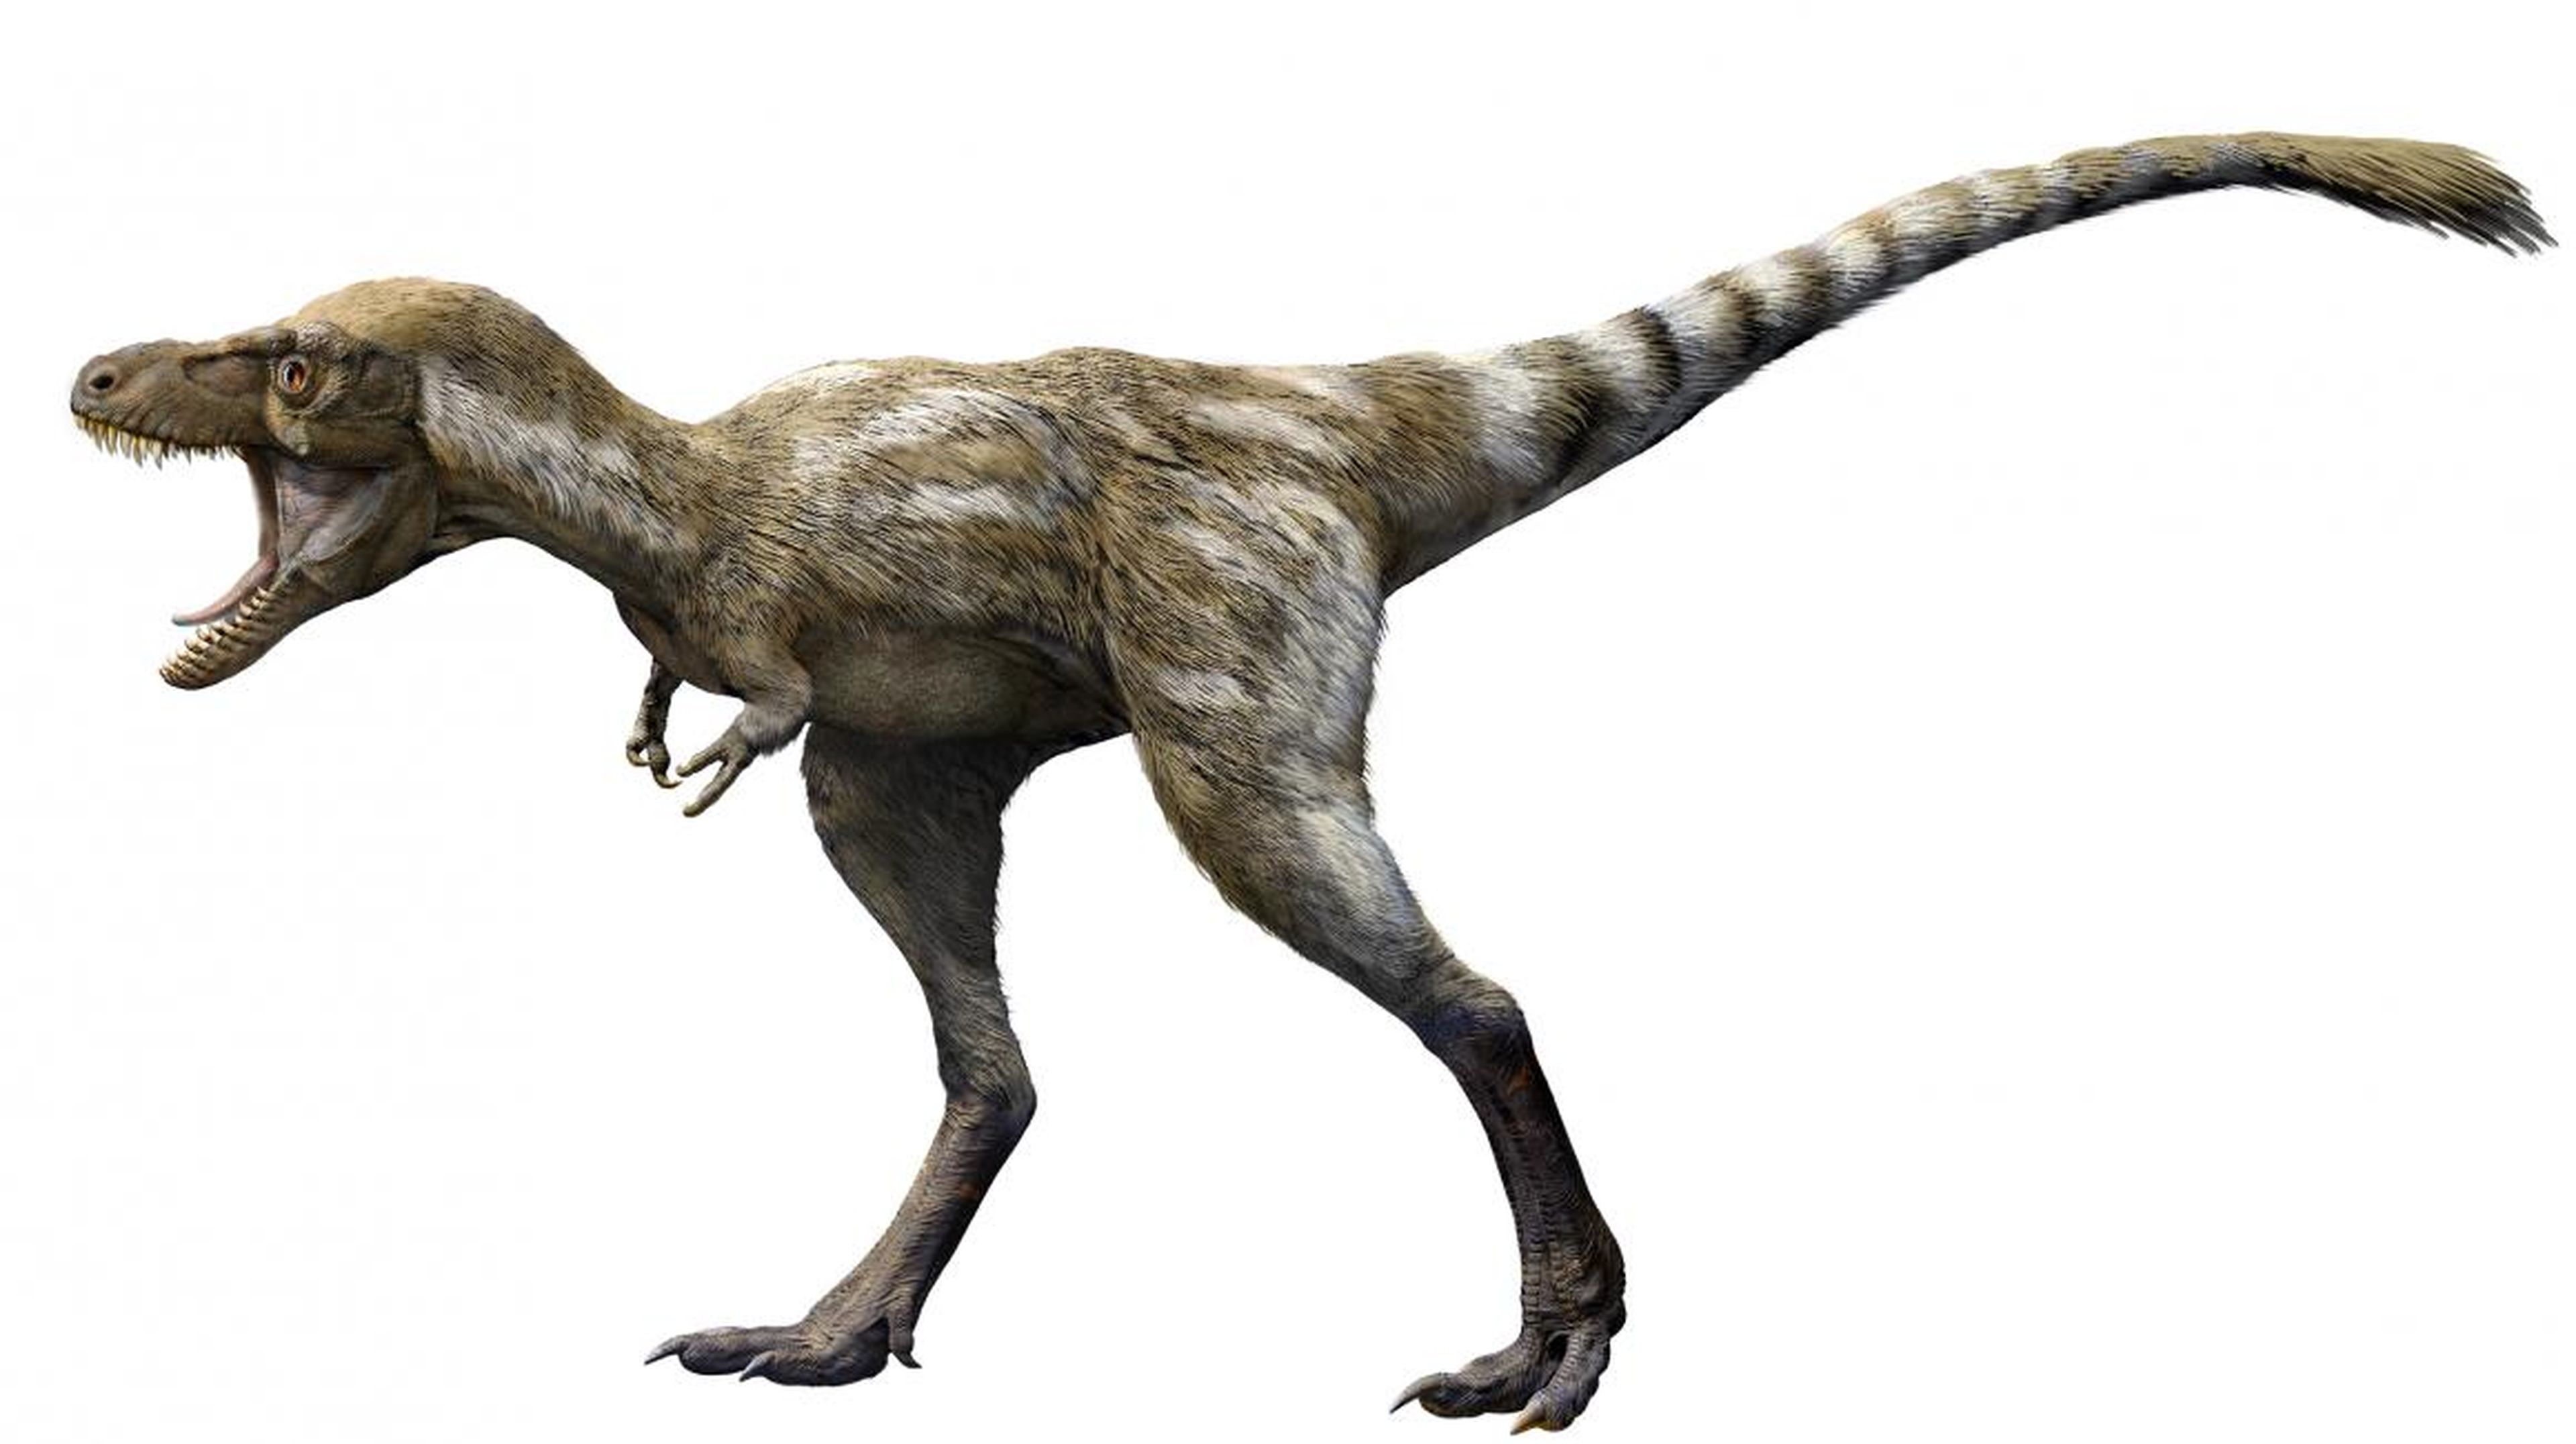 T. rex had a fairly short lifespan by human standards. No known T. rex lived past the age of 30.